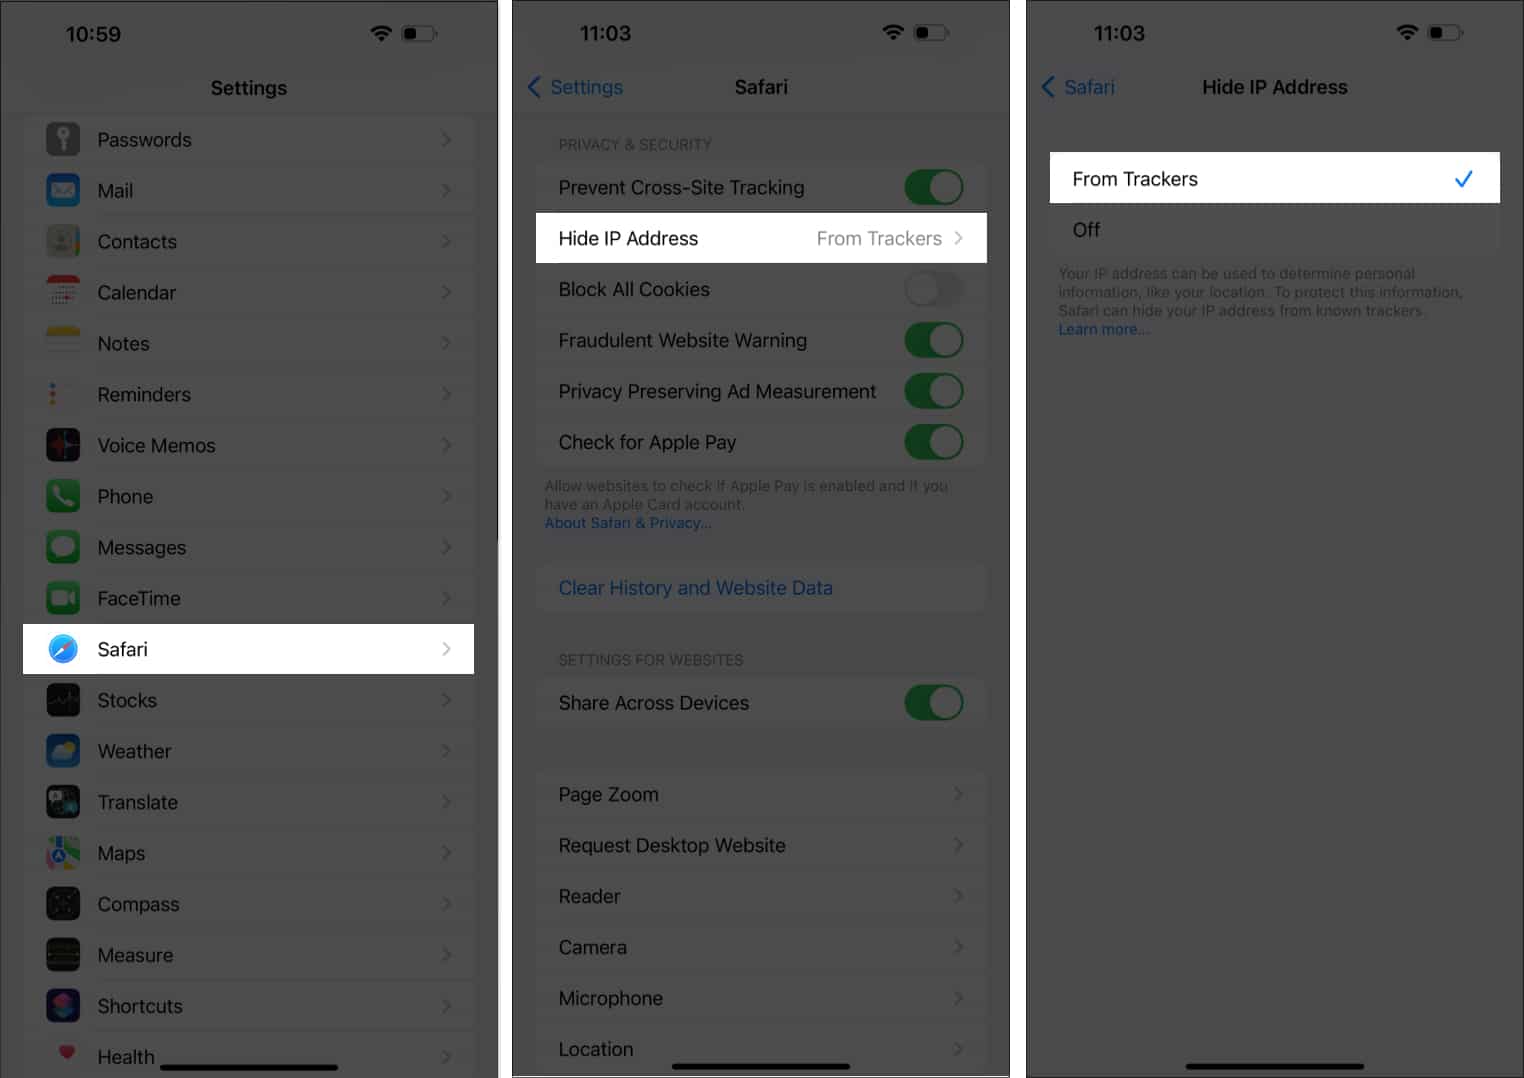 How to hide Safari IP address from trackers on iPhone